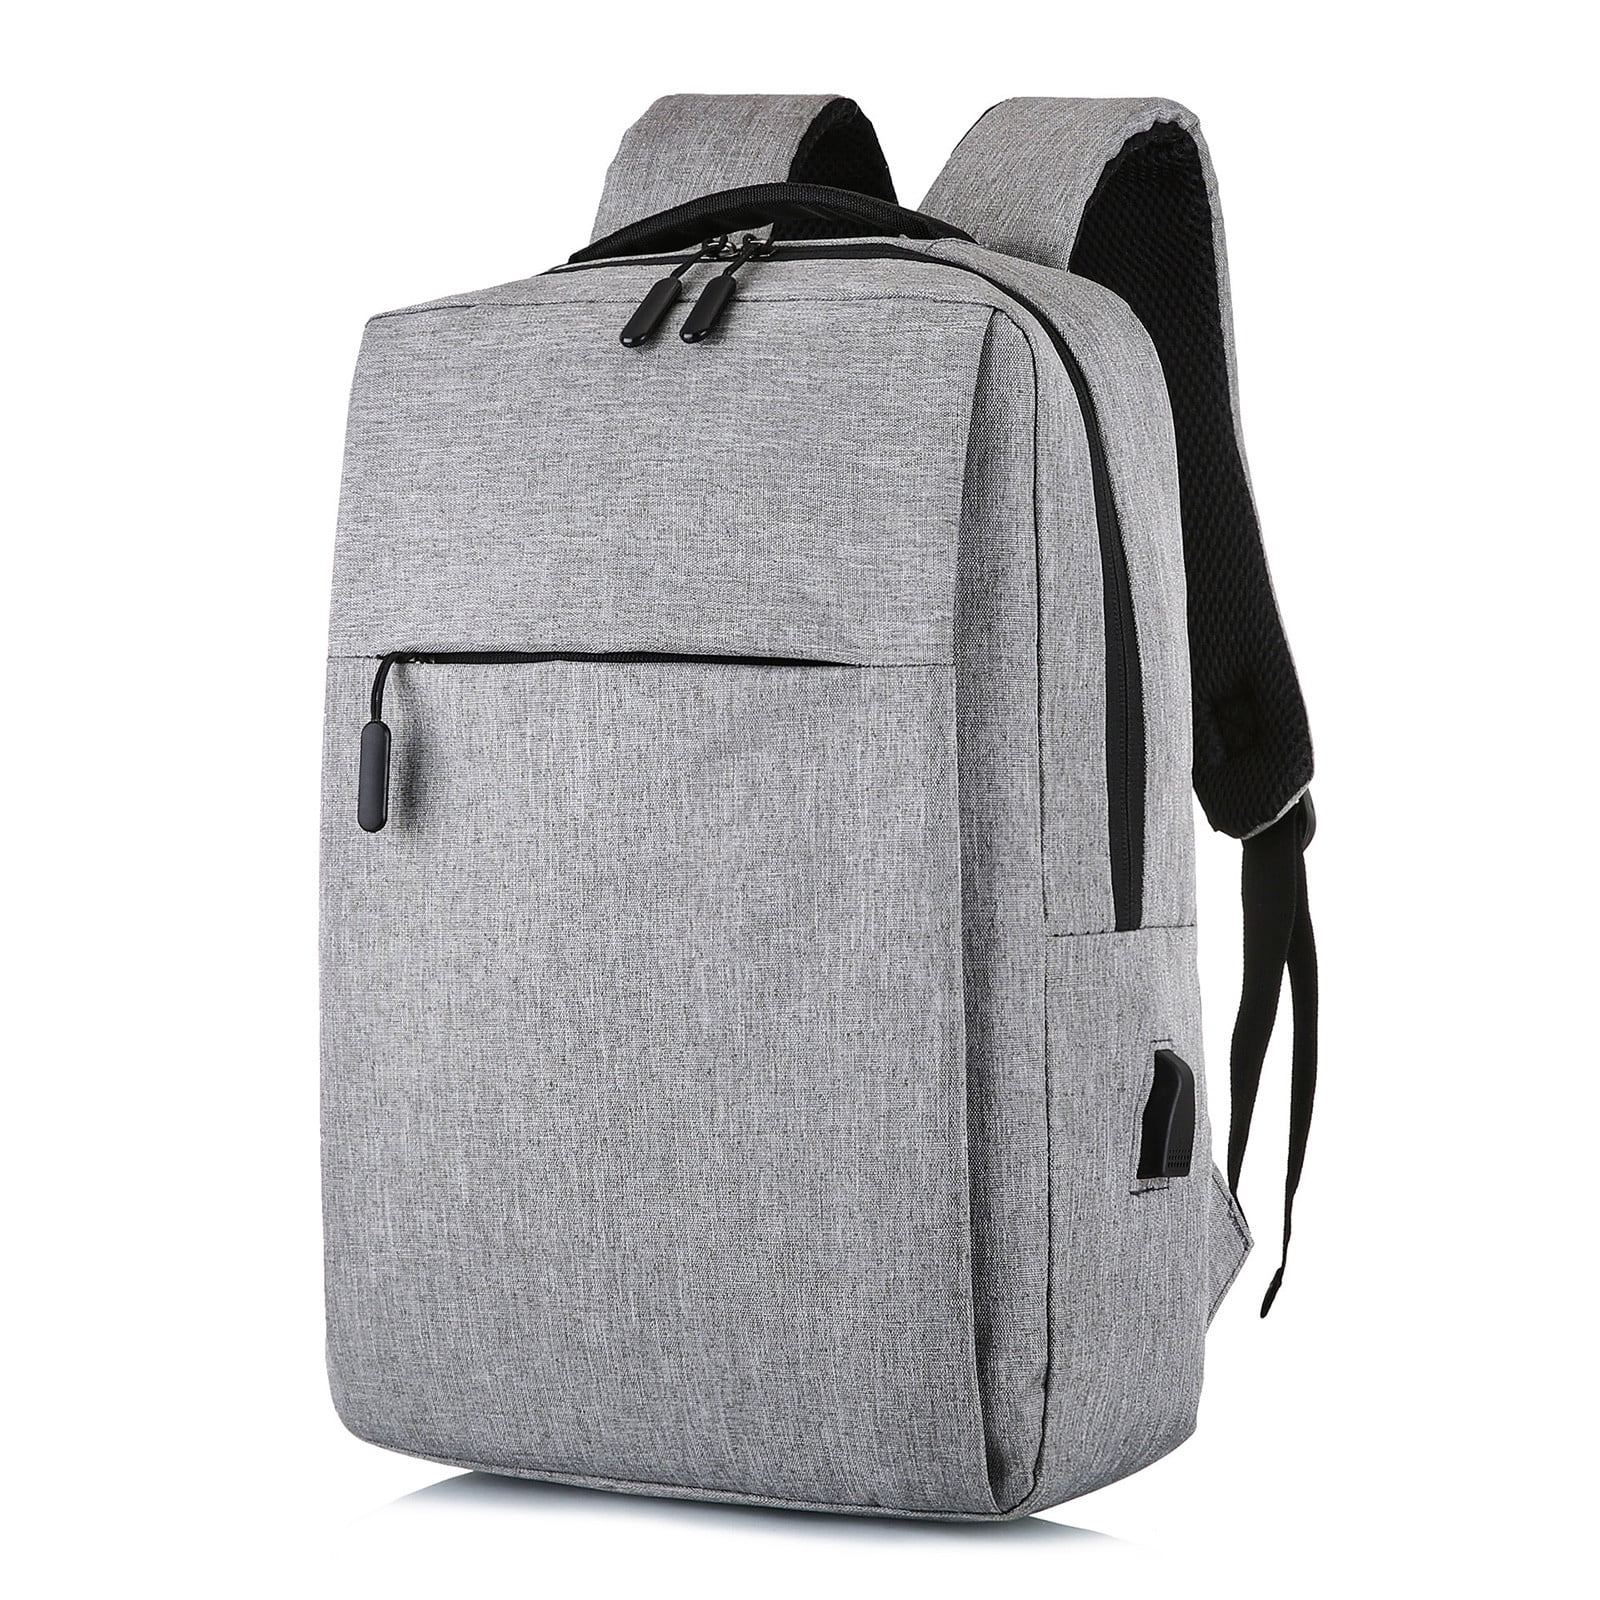 Pompotops Gray Laptop Backpack 15.6 Inch, Business Slim Durable Laptops ...